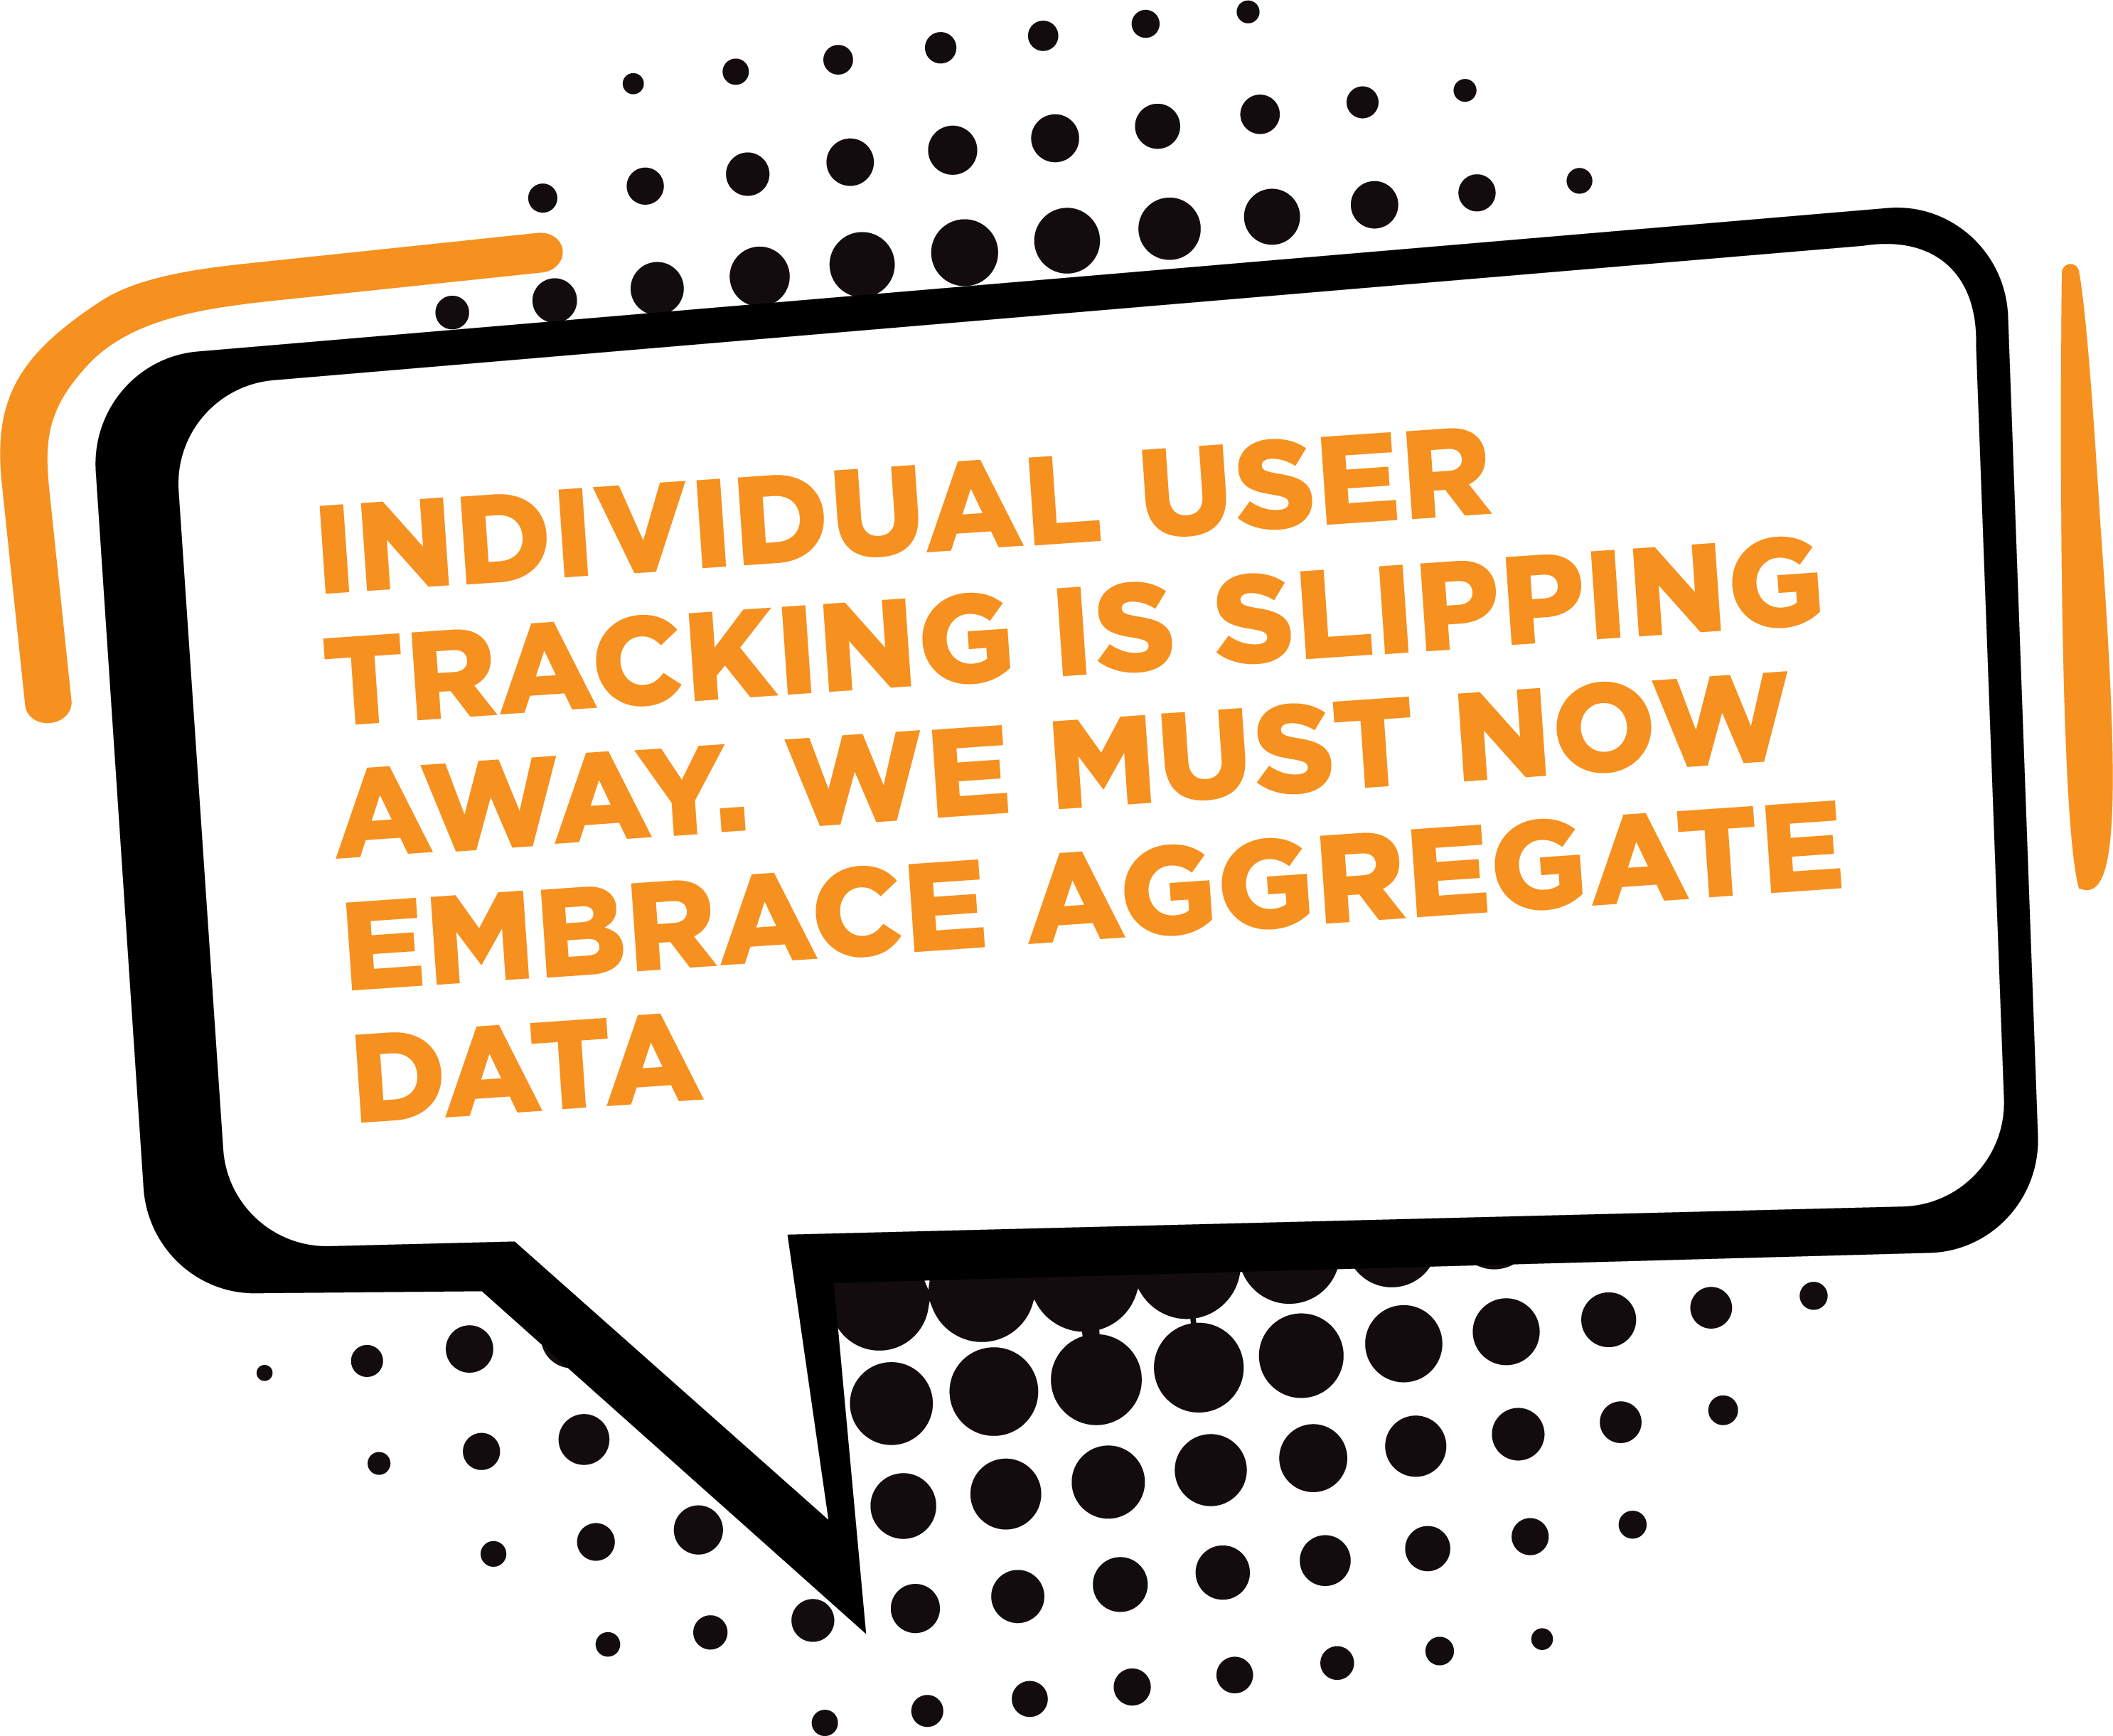 Individual user tracking is slipping away. We must now embrace aggregate data